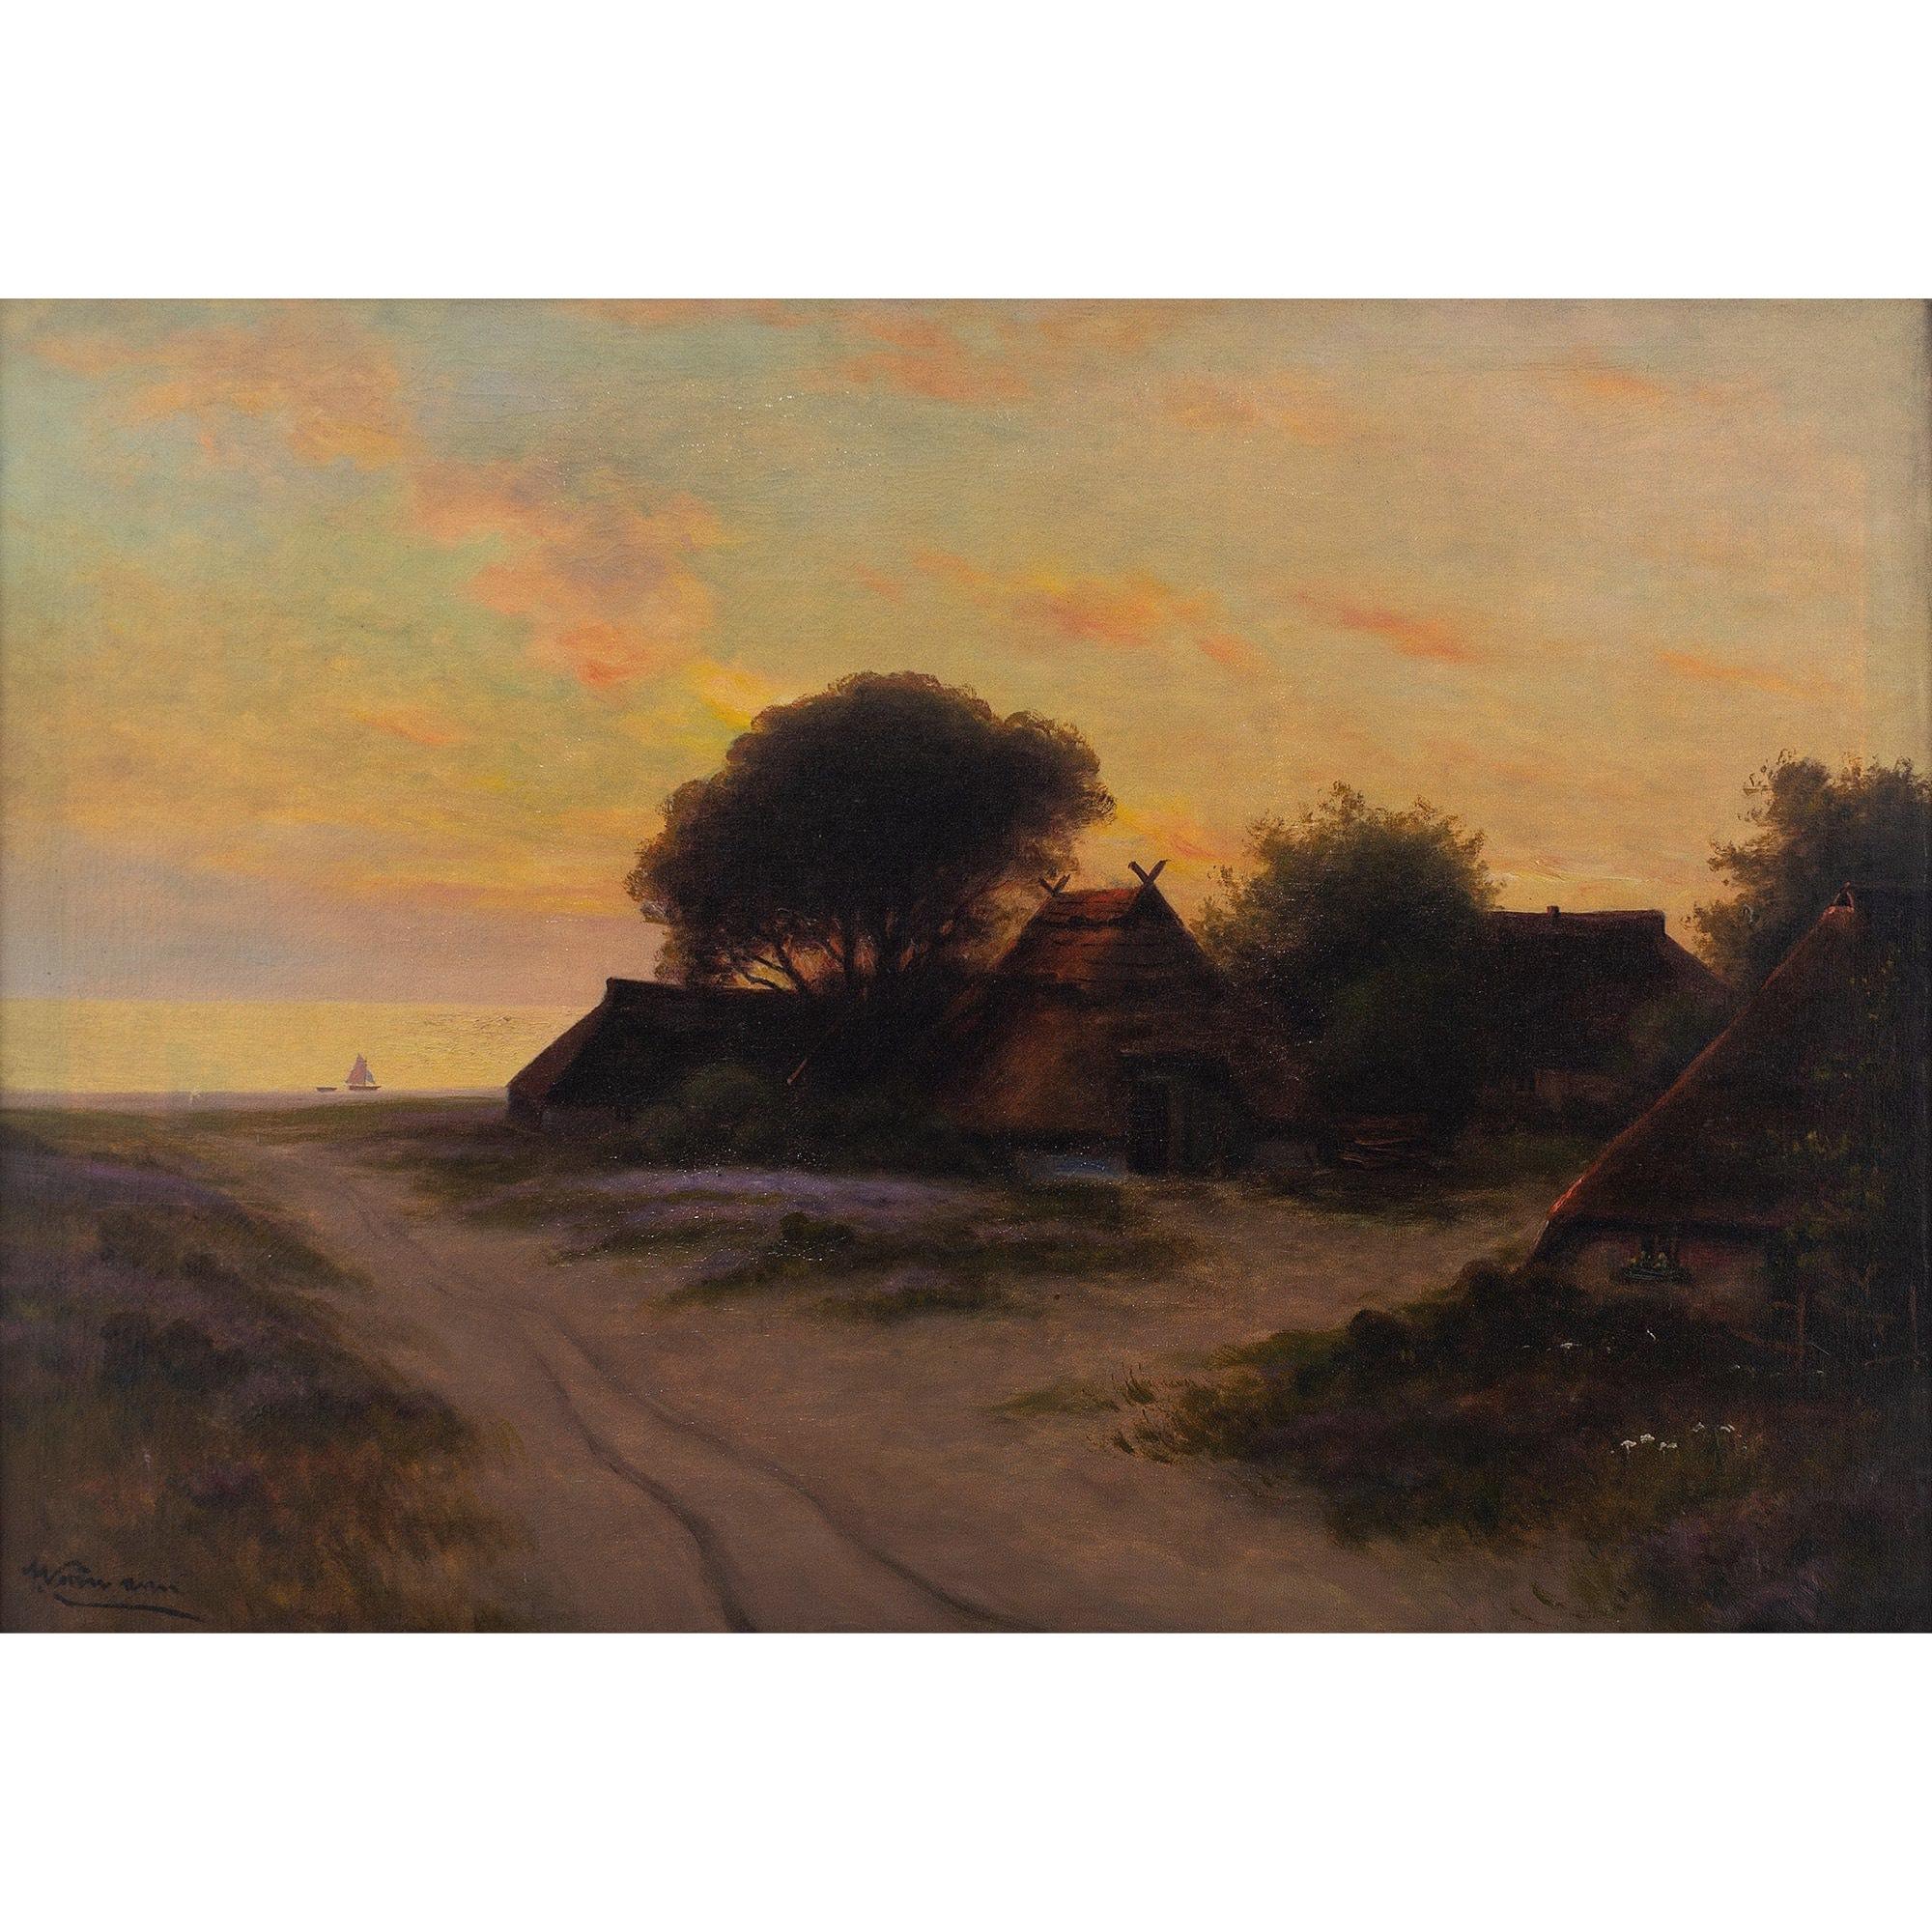 An atmospheric early 20th-century landscape painting depicting a beautiful sunset over a peaceful beach. Small dwellings are silhouetted against the warm hues of the evening sky.

The painting is signed ‘A Normann’ in homage to the great Norwegian